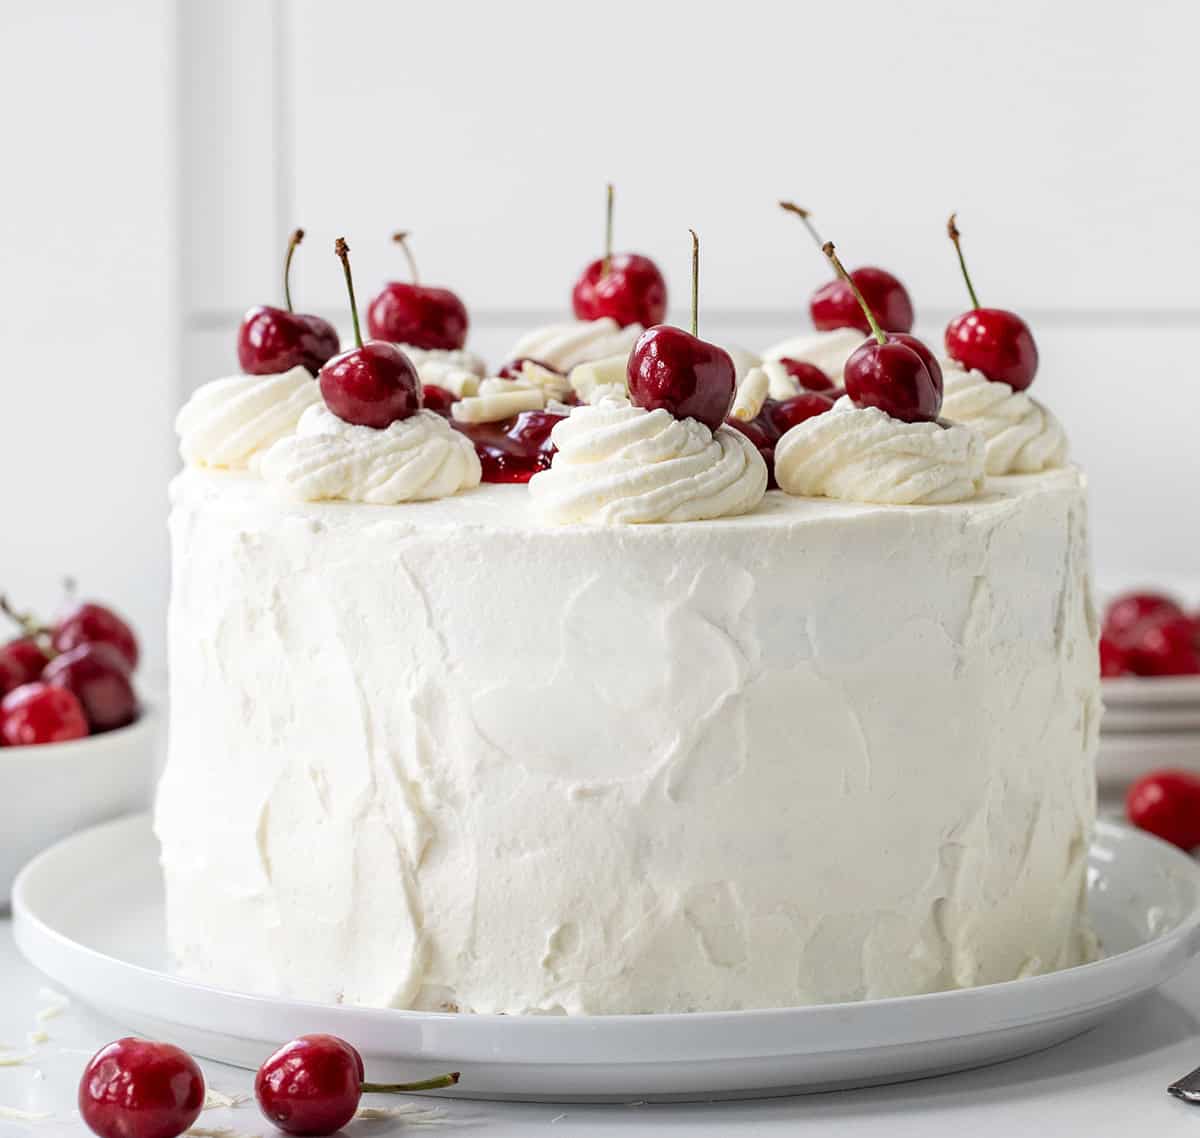 Whole White Forest Cake sitting on a cake plate with fresh cherries all around and white plates in the background.